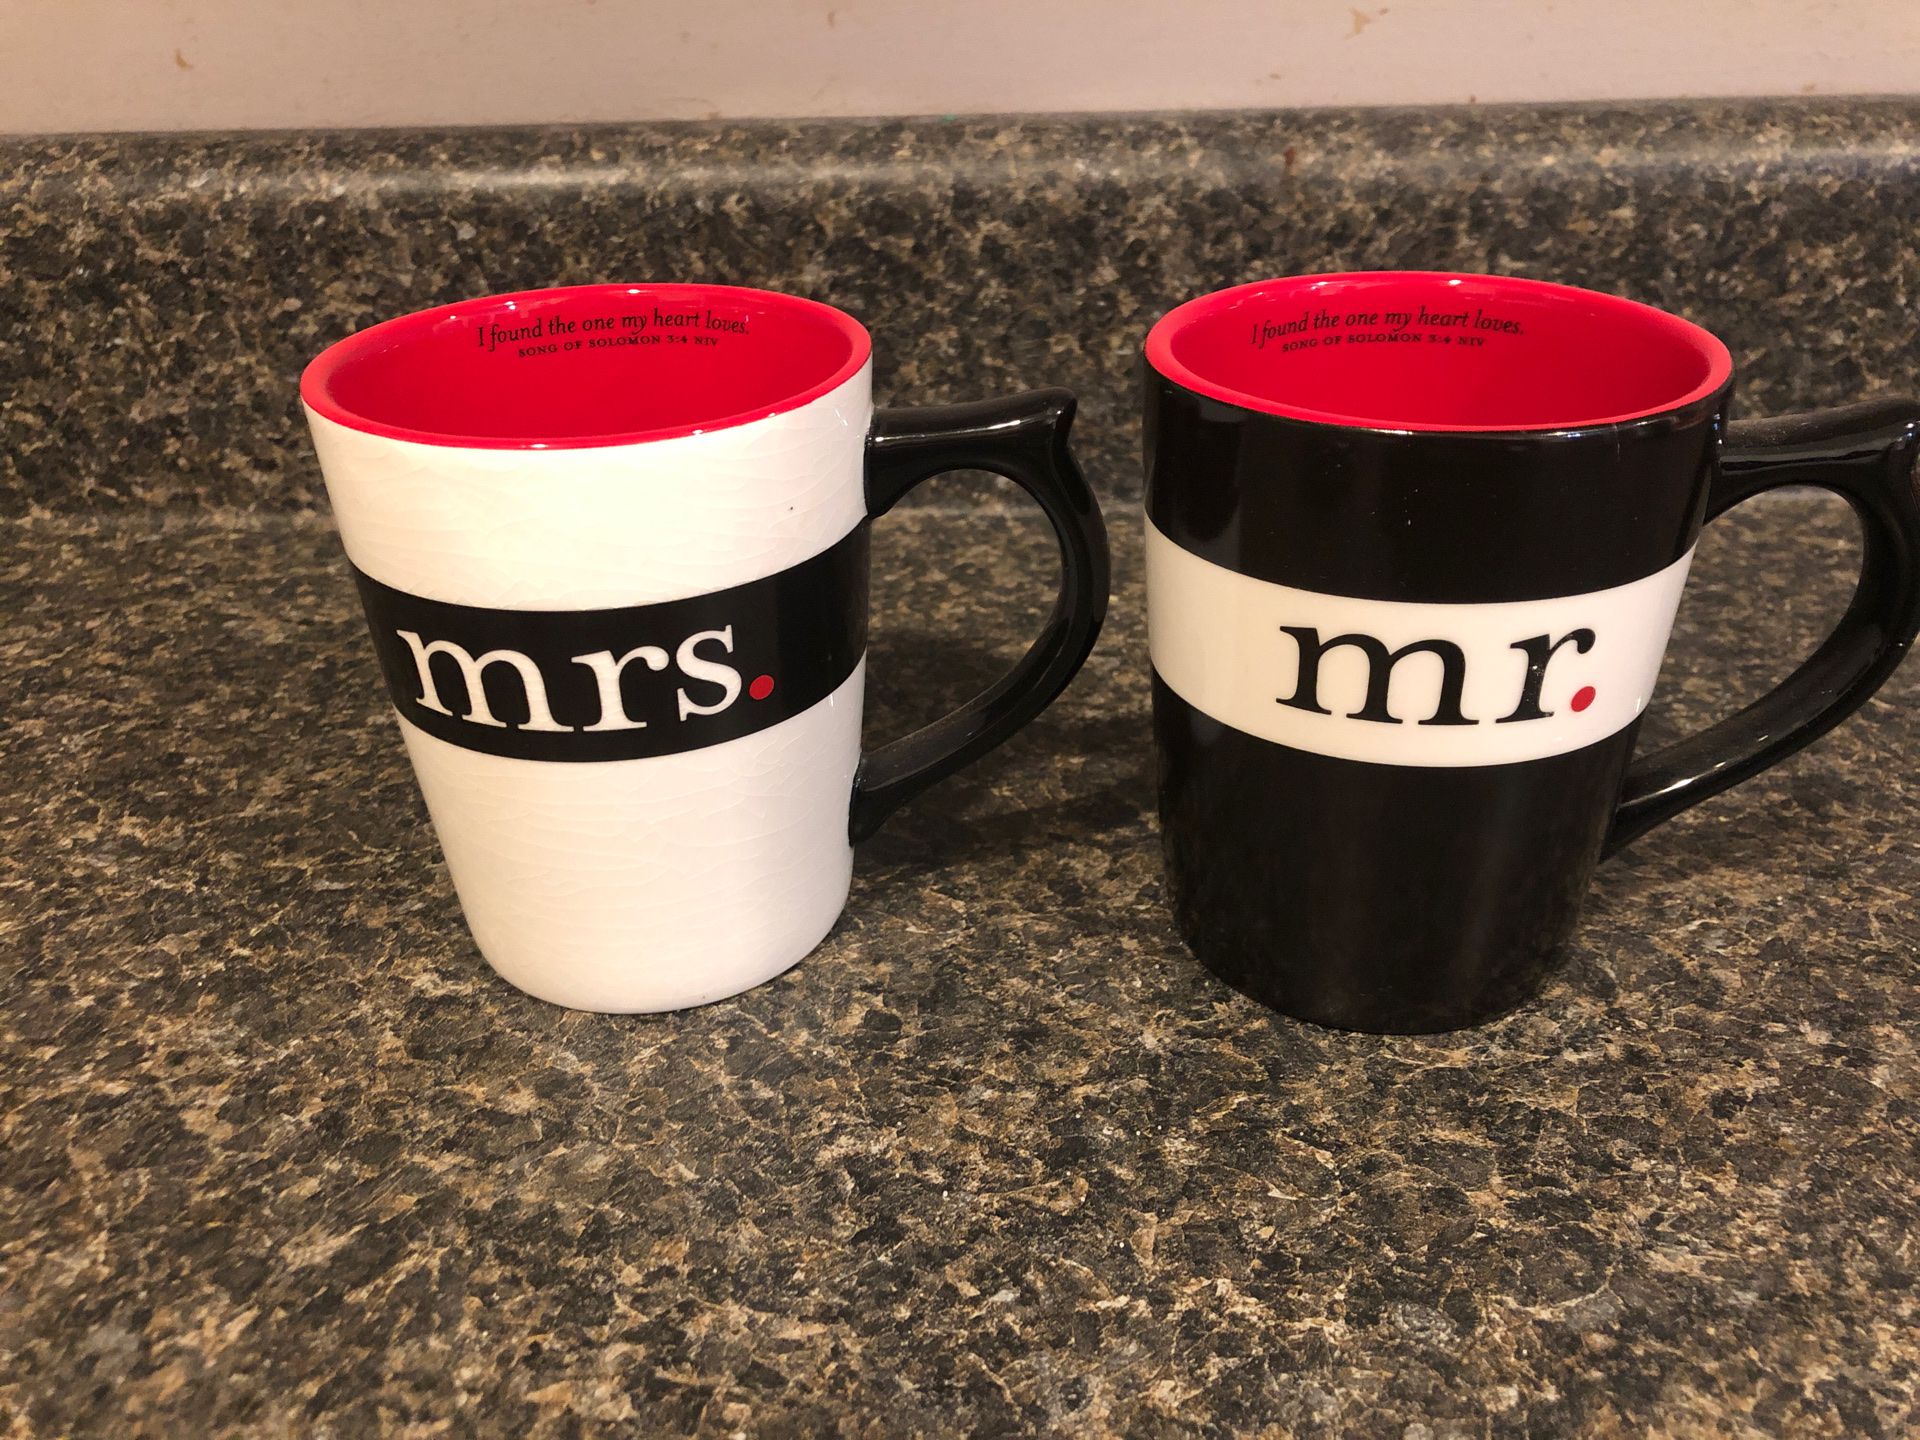 New mr & mrs coffee cups I found the one my heart desires